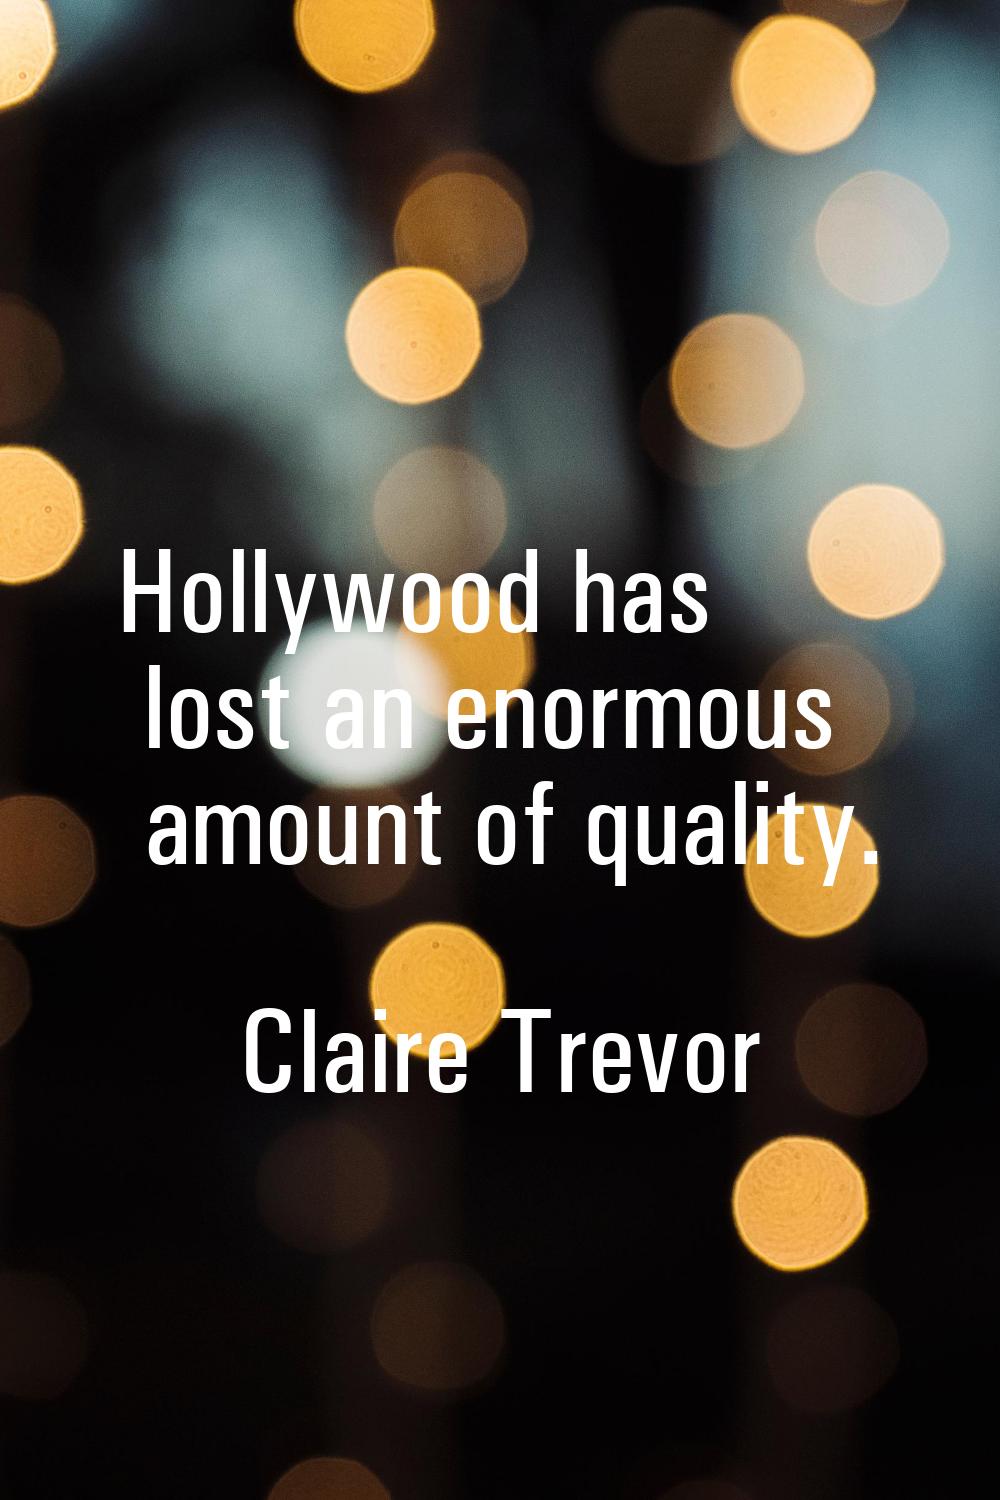 Hollywood has lost an enormous amount of quality.